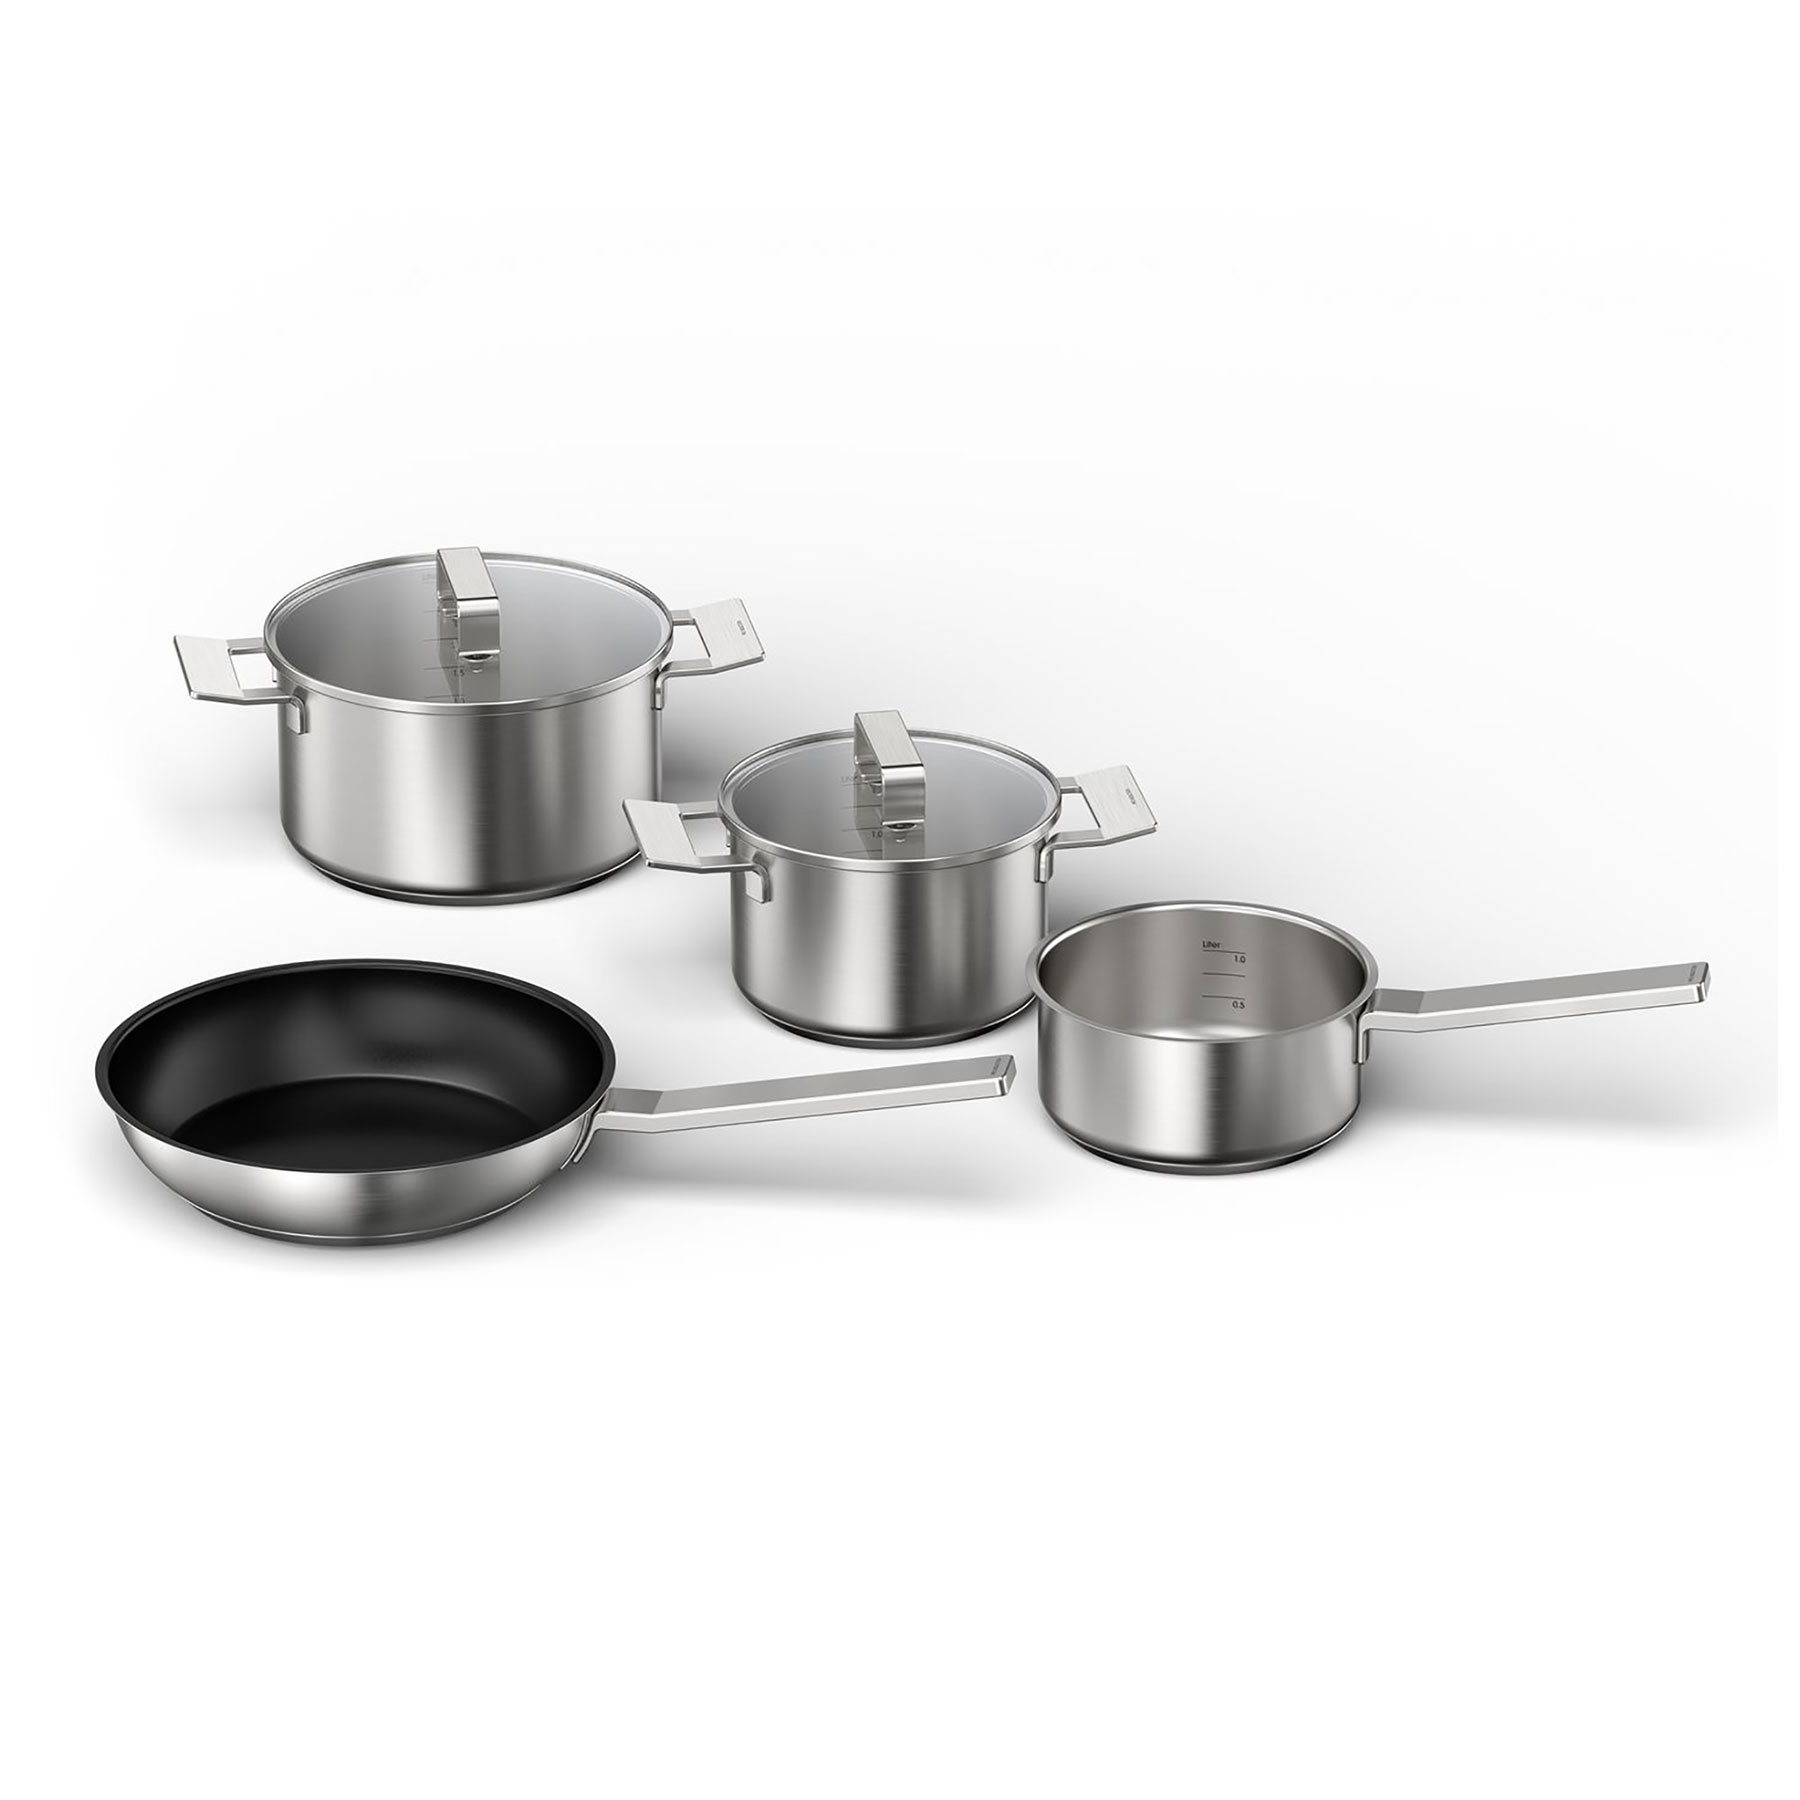 Image of Siemens HZ9SE040 Four Piece Pan Set Suited For Induction